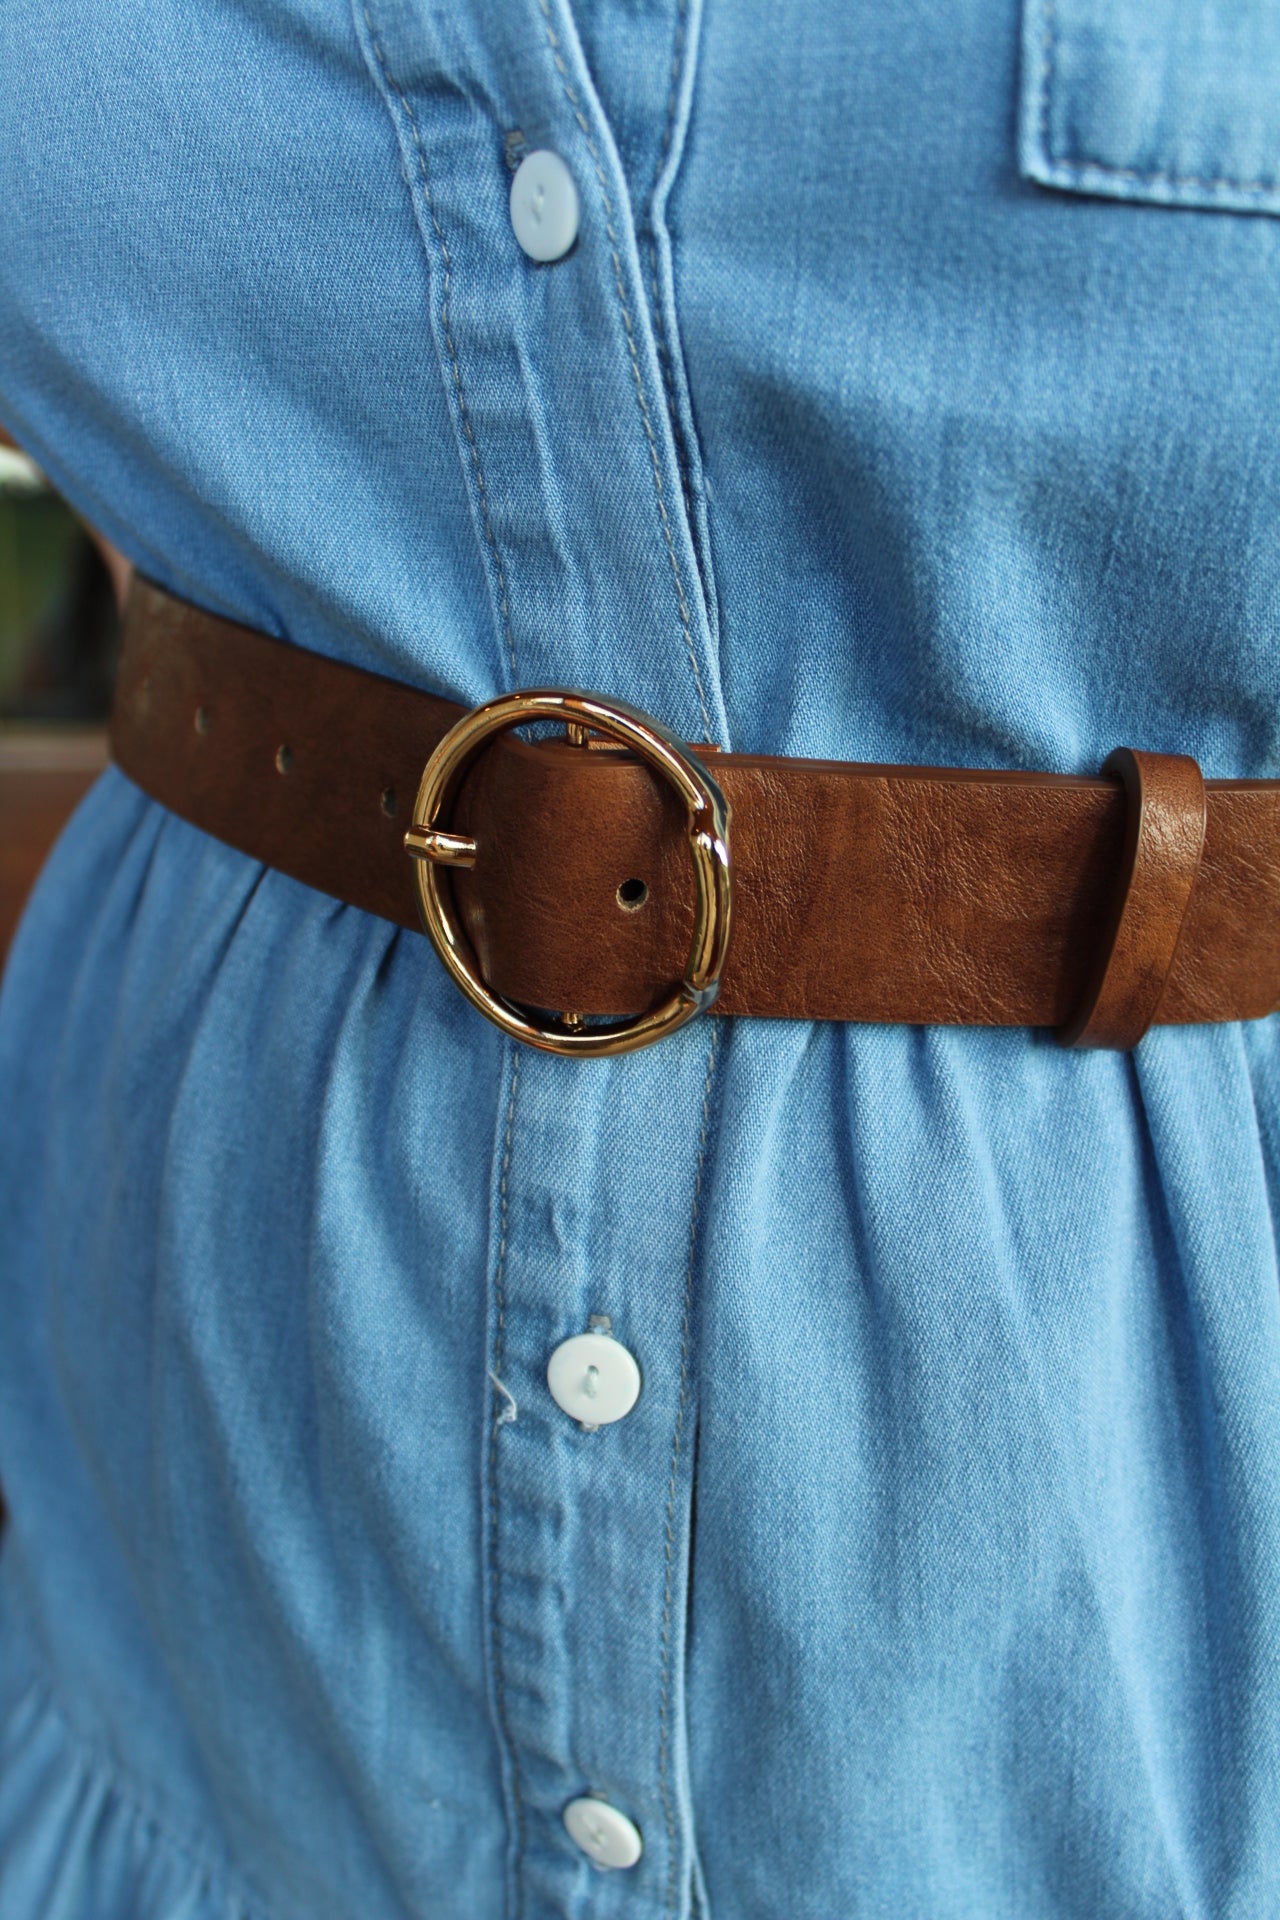 Brown Belt With Gold Buckle